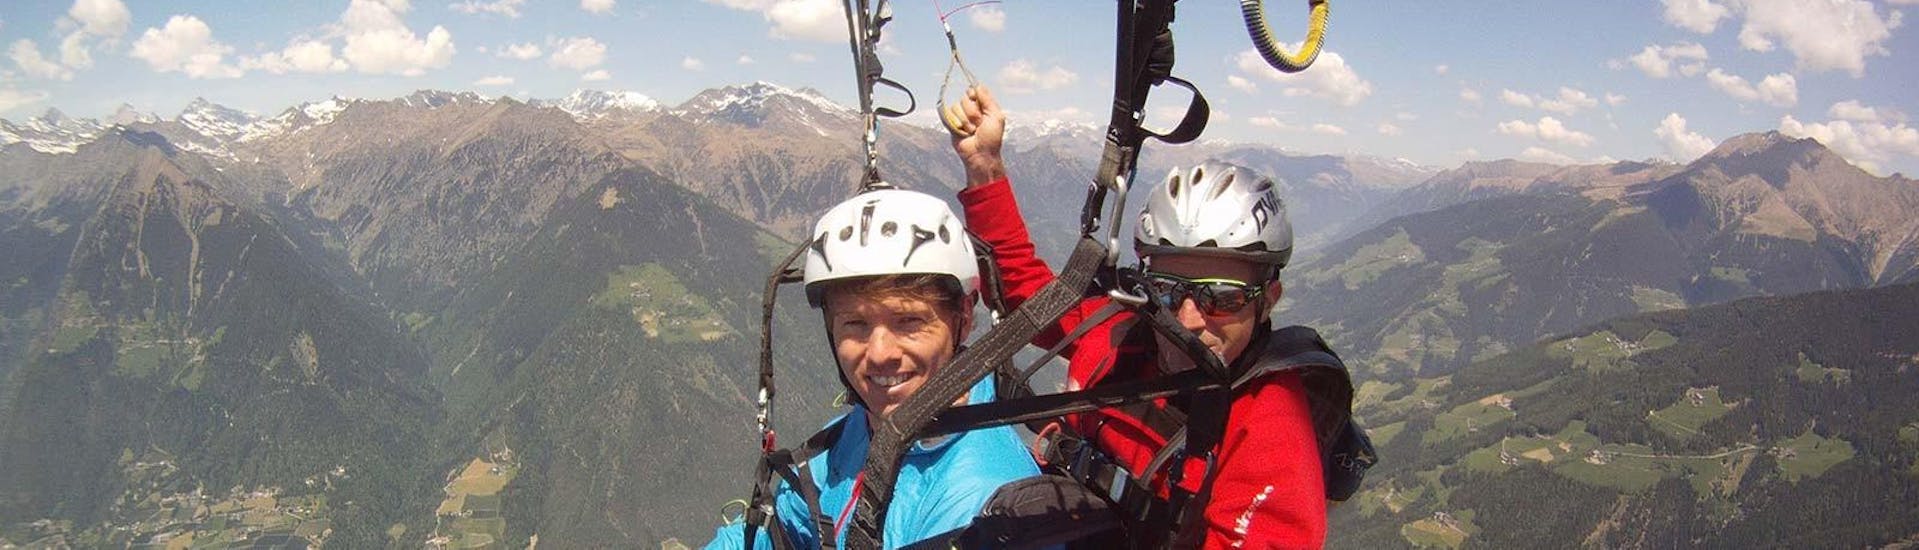 Picture time during the Tandem Paragliding at Punta Cervinia - Summit Flight with FlyHirzer Saltusio.